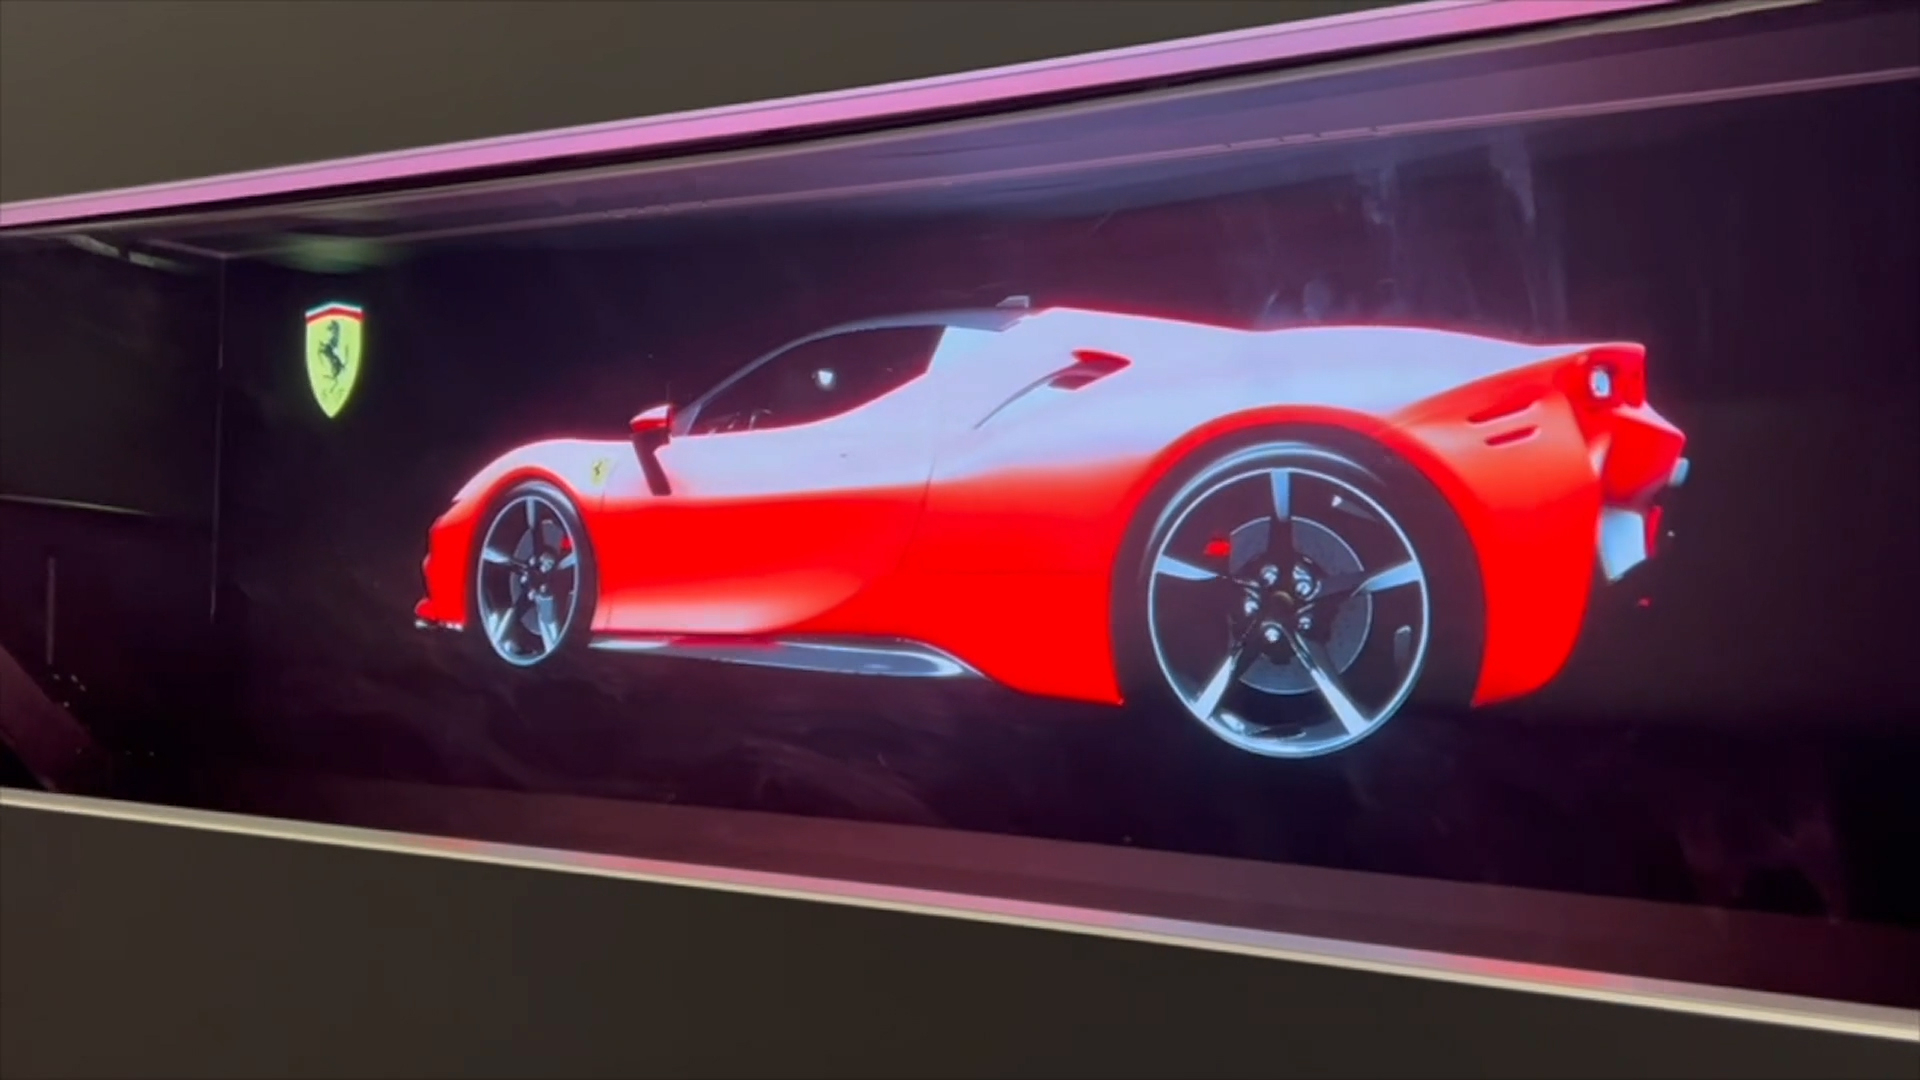 Foundation Automotive's evrdrive launched their first Experience Center in The Woodlands Mall. evrdrive is a revolutionary e-commerce automotive company with innovative hologram technology, specializing in used car sales.